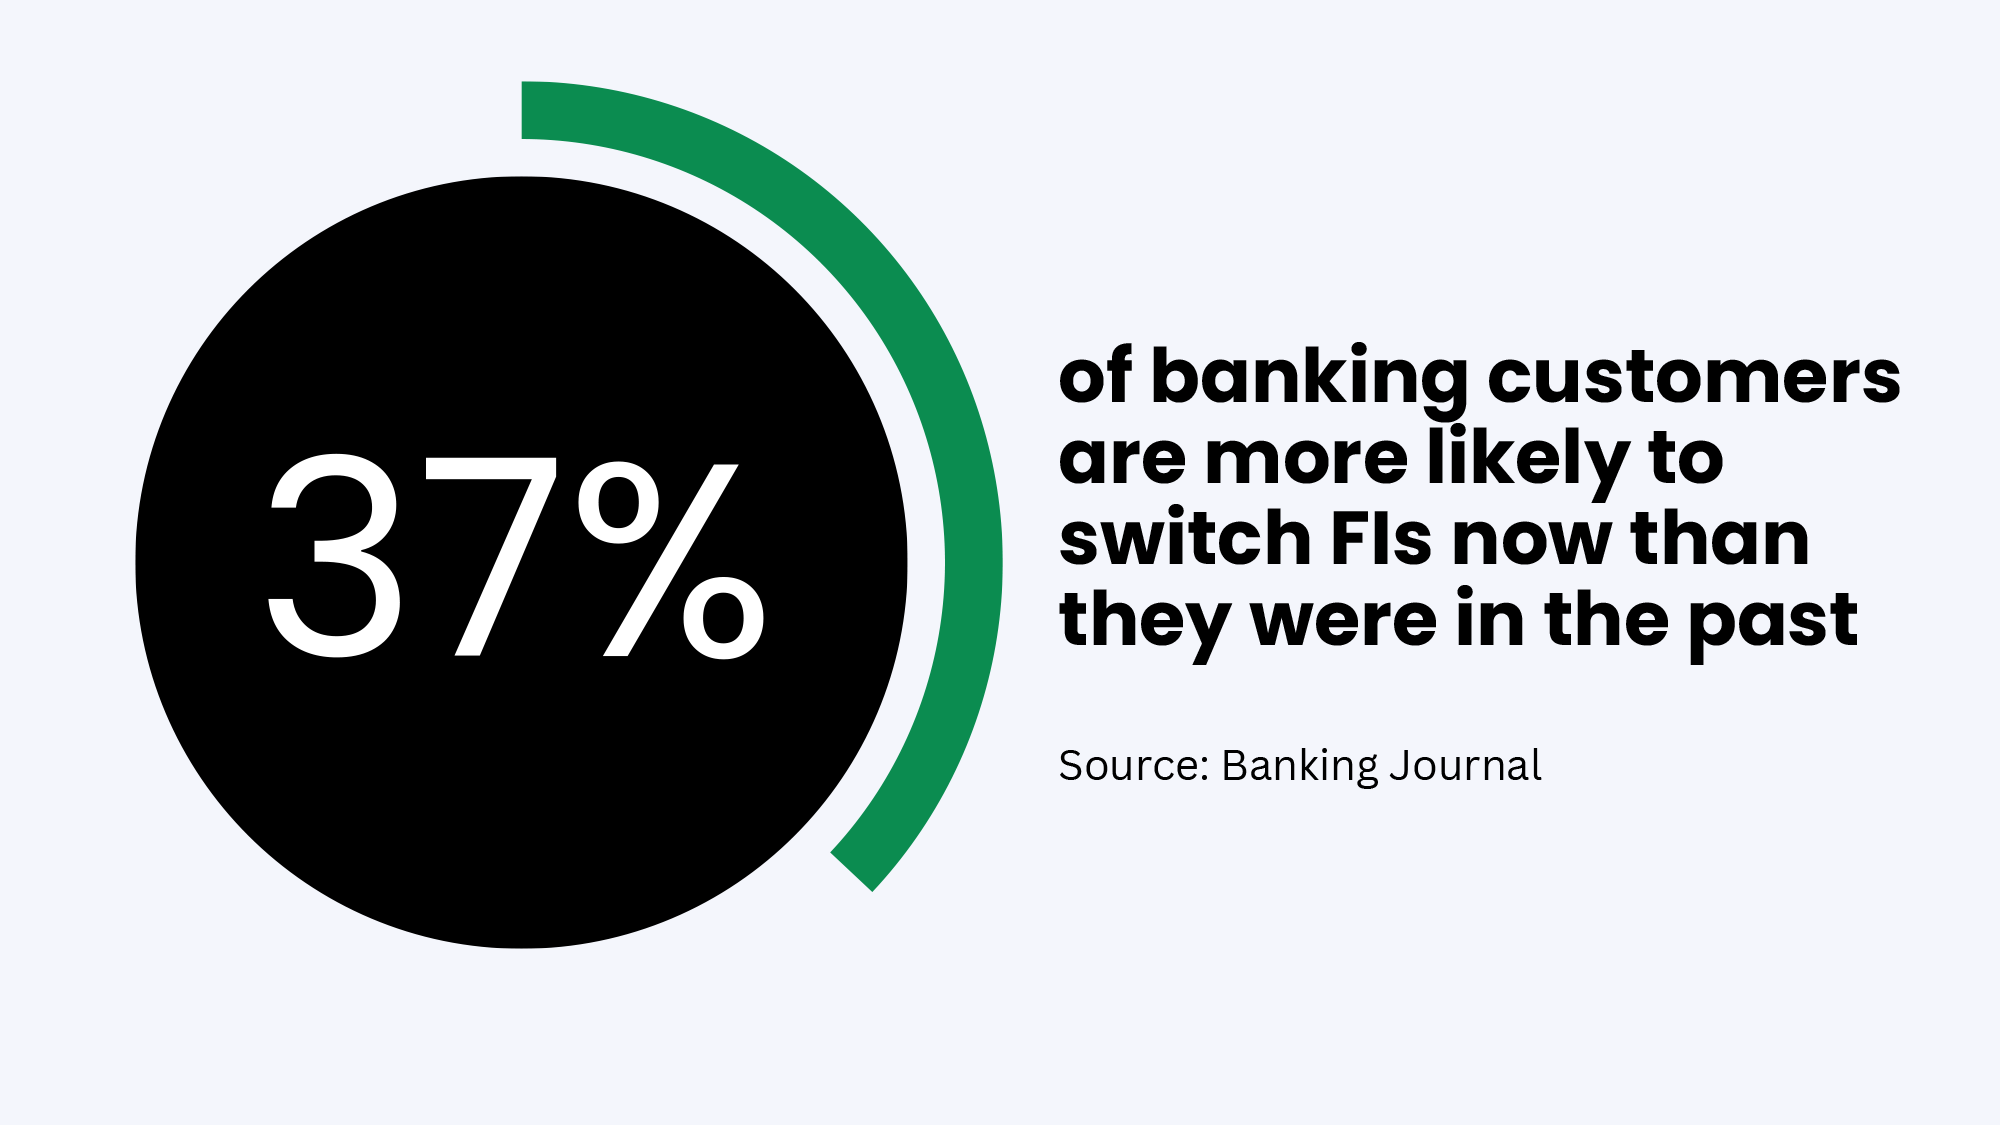 37% of banking customers are more likely to switch FIs now than they were in the past